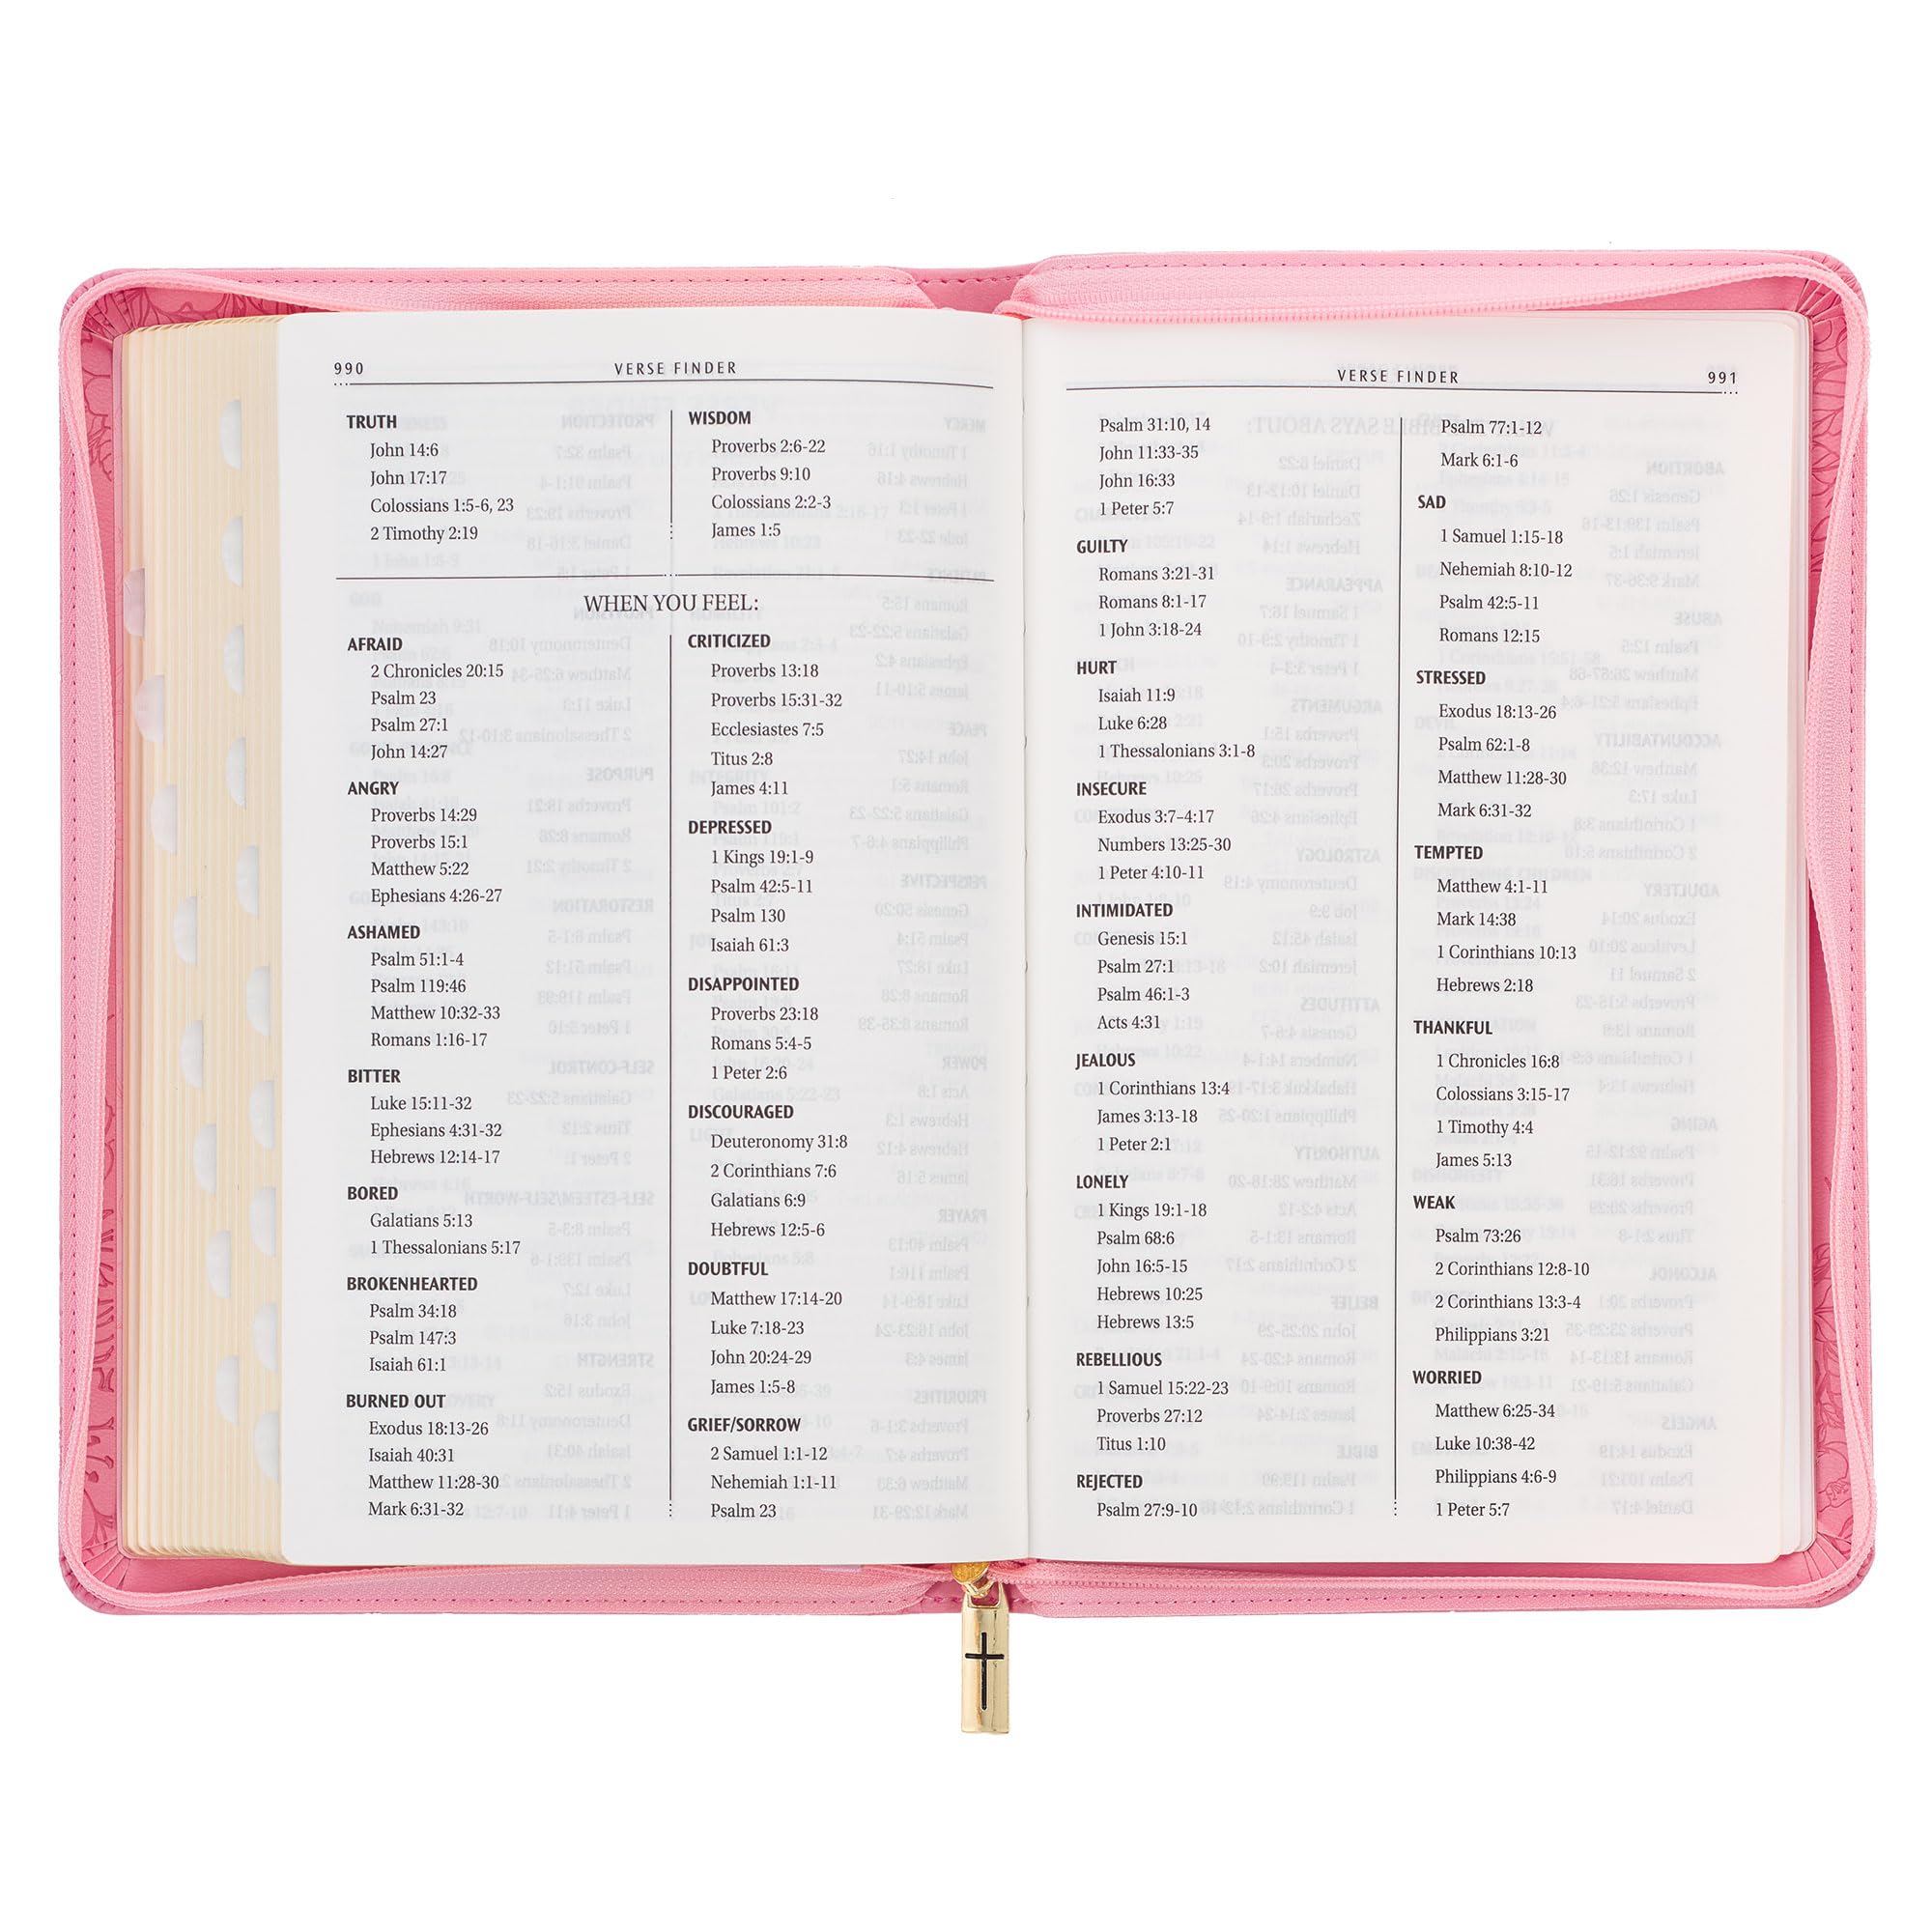 KJV Holy Bible, Standard Size Faux Leather Red Letter Edition Thumb Index, Ribbon Marker, King James Version, Pink Floral Zipper Closure